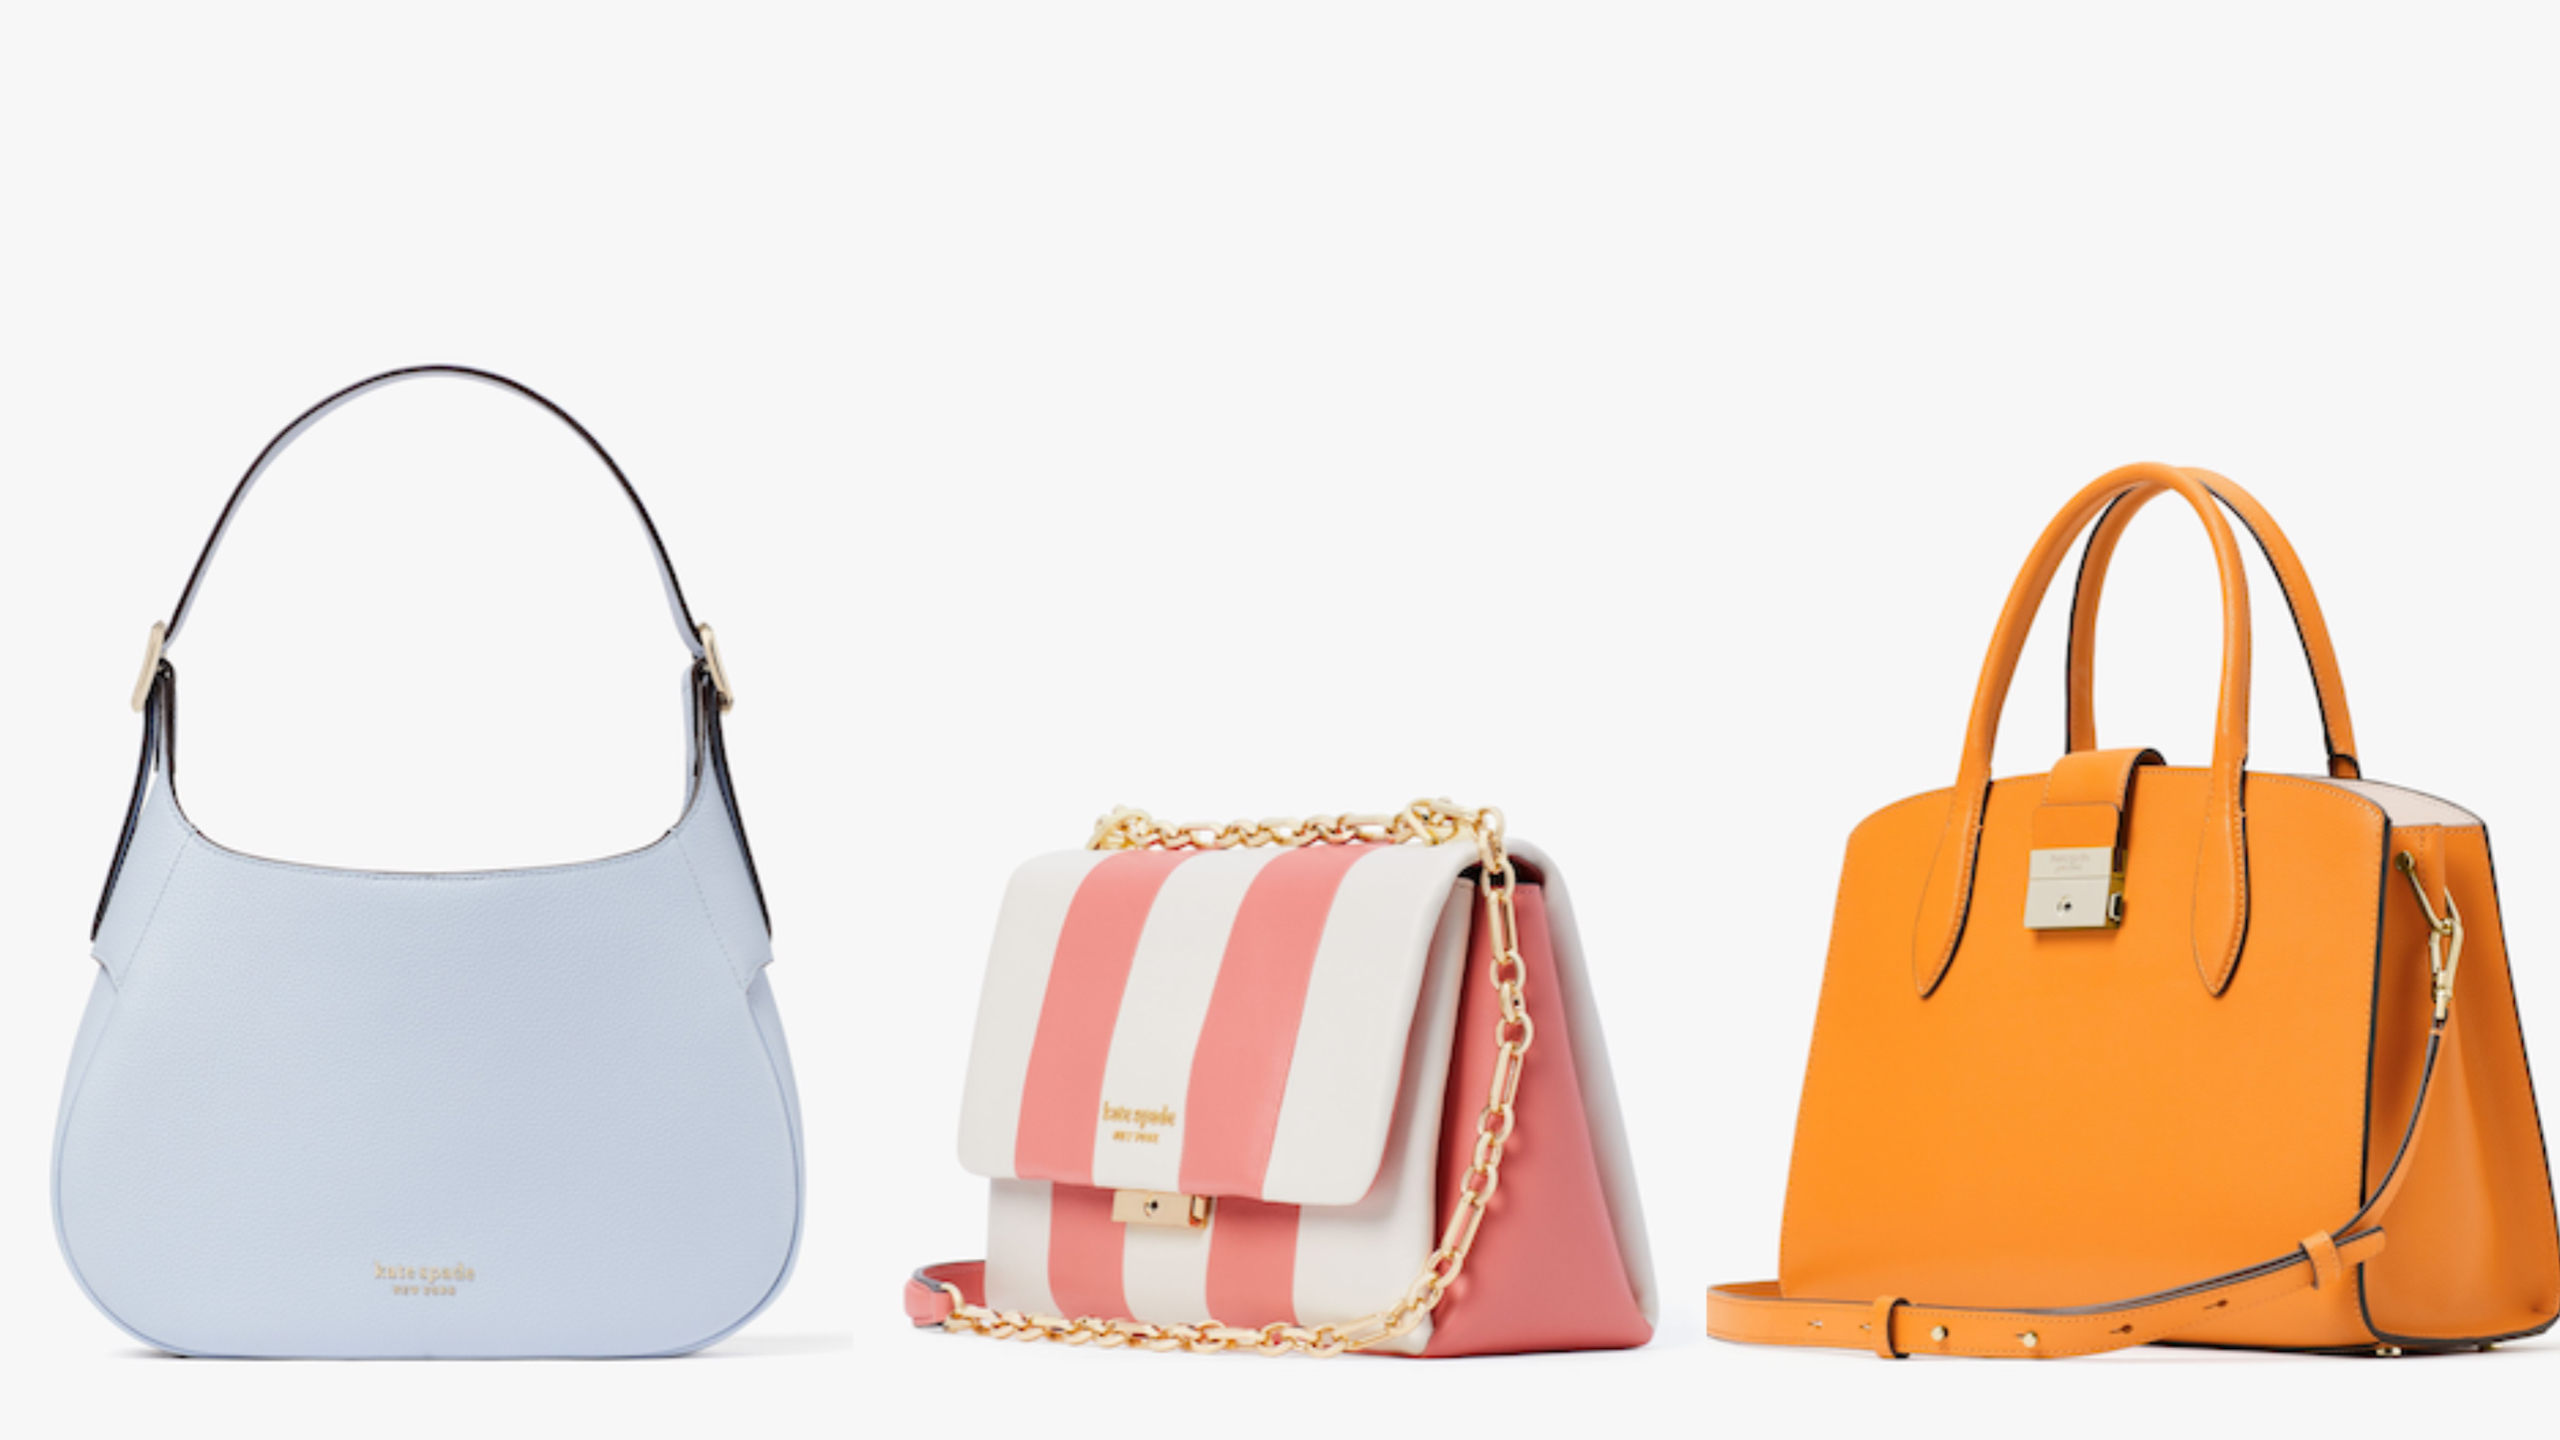 Kate Spade New York Sale Take 30 Off Work Totes Shoulder Bags and More  BestSelling Styles  Entertainment Tonight